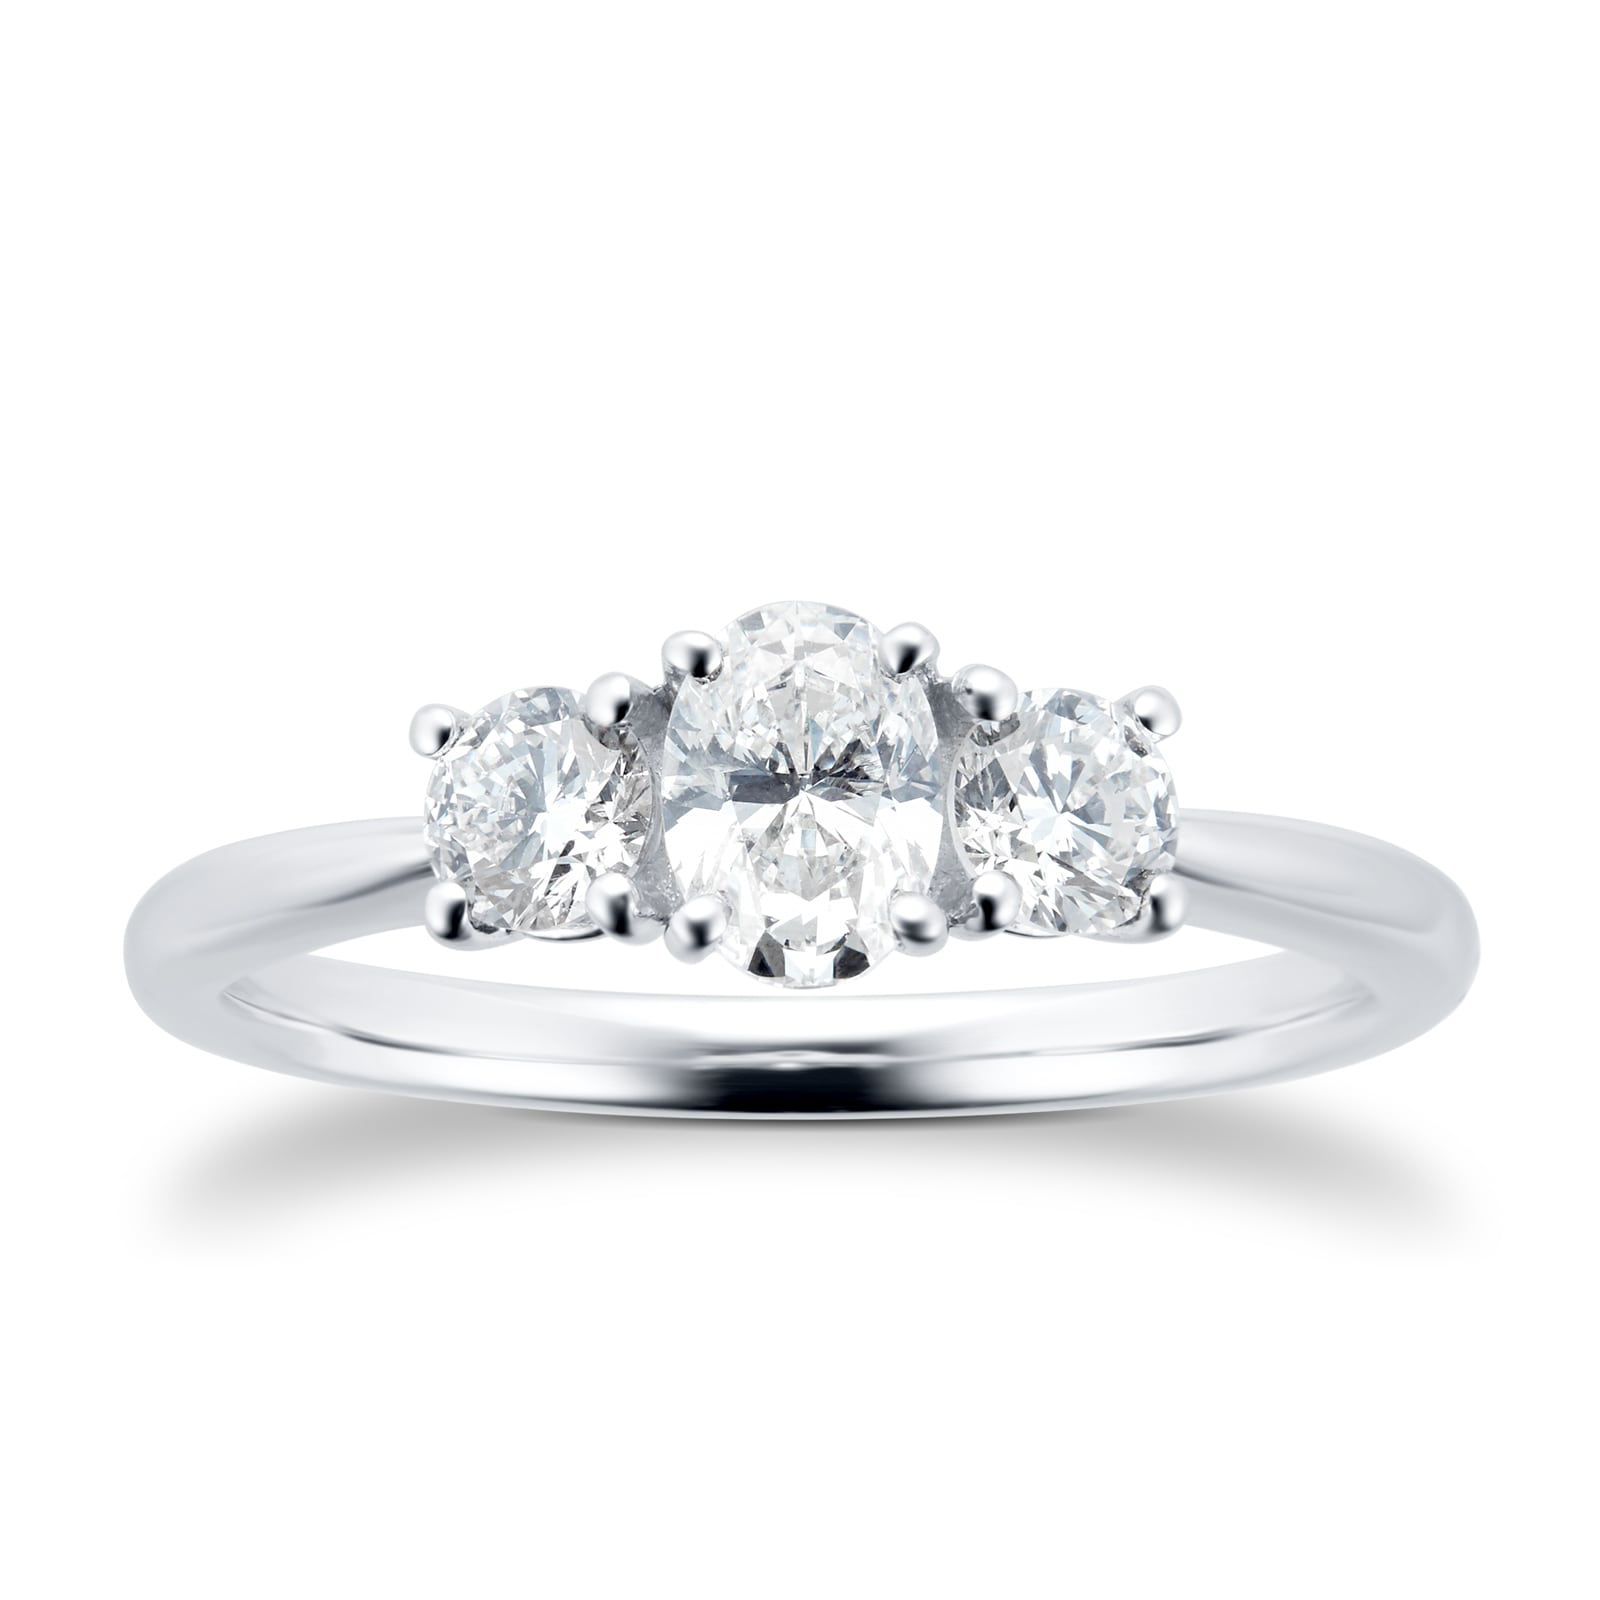 Platinum 0.76cttw Diamond Thee Stone Oval & Brilliant Cut Engagement Ring - Ring Size N